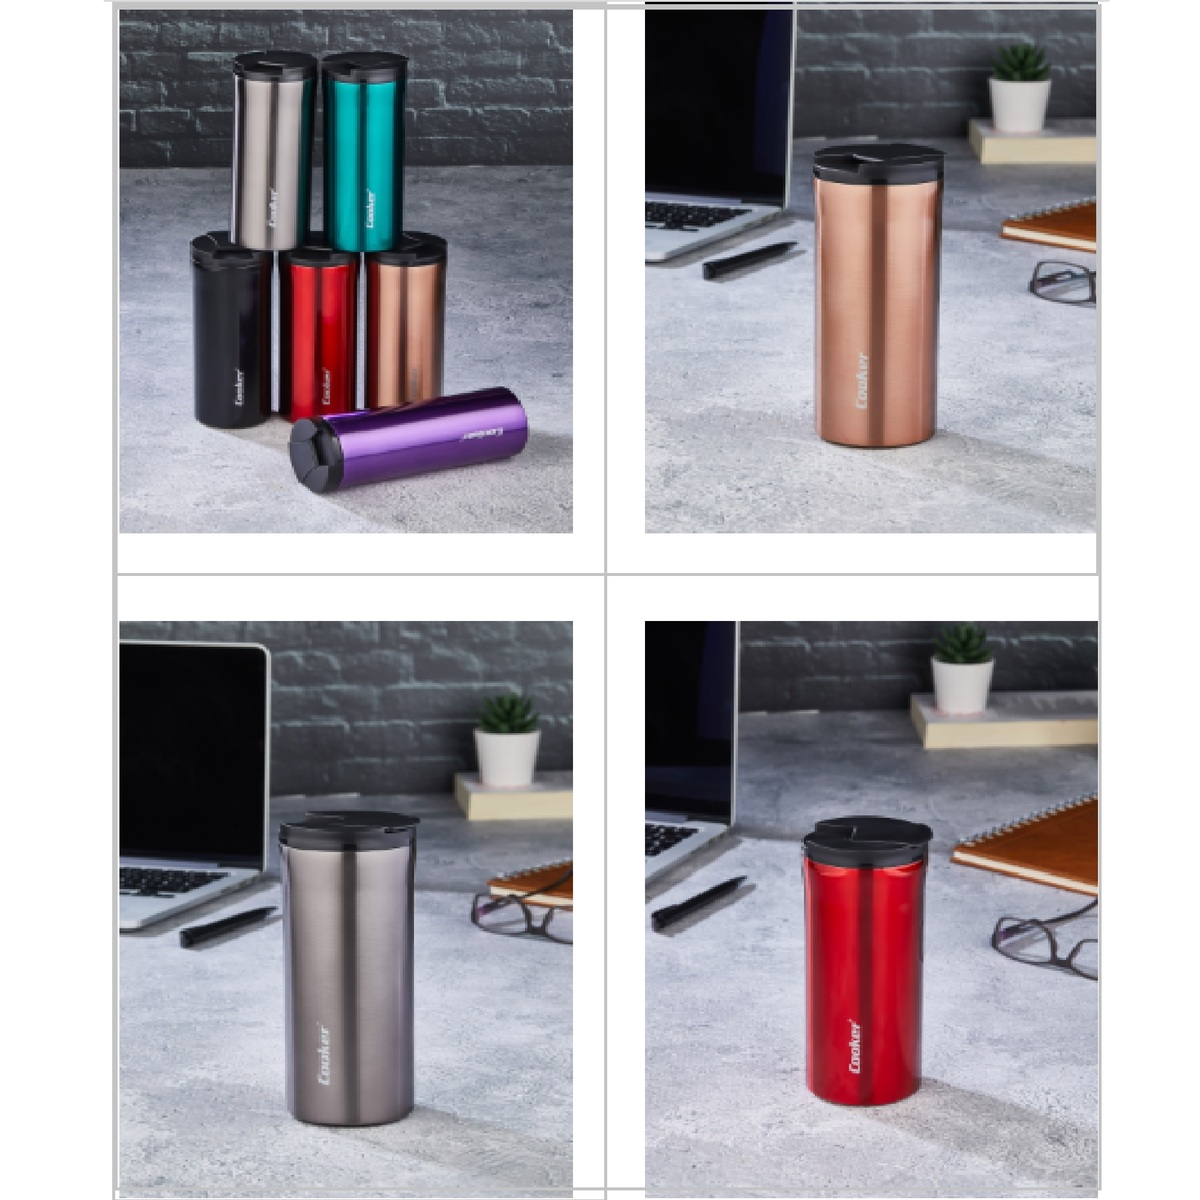 Cooker Stainless Steel Double Wall Thermos Mug 400ml 2041